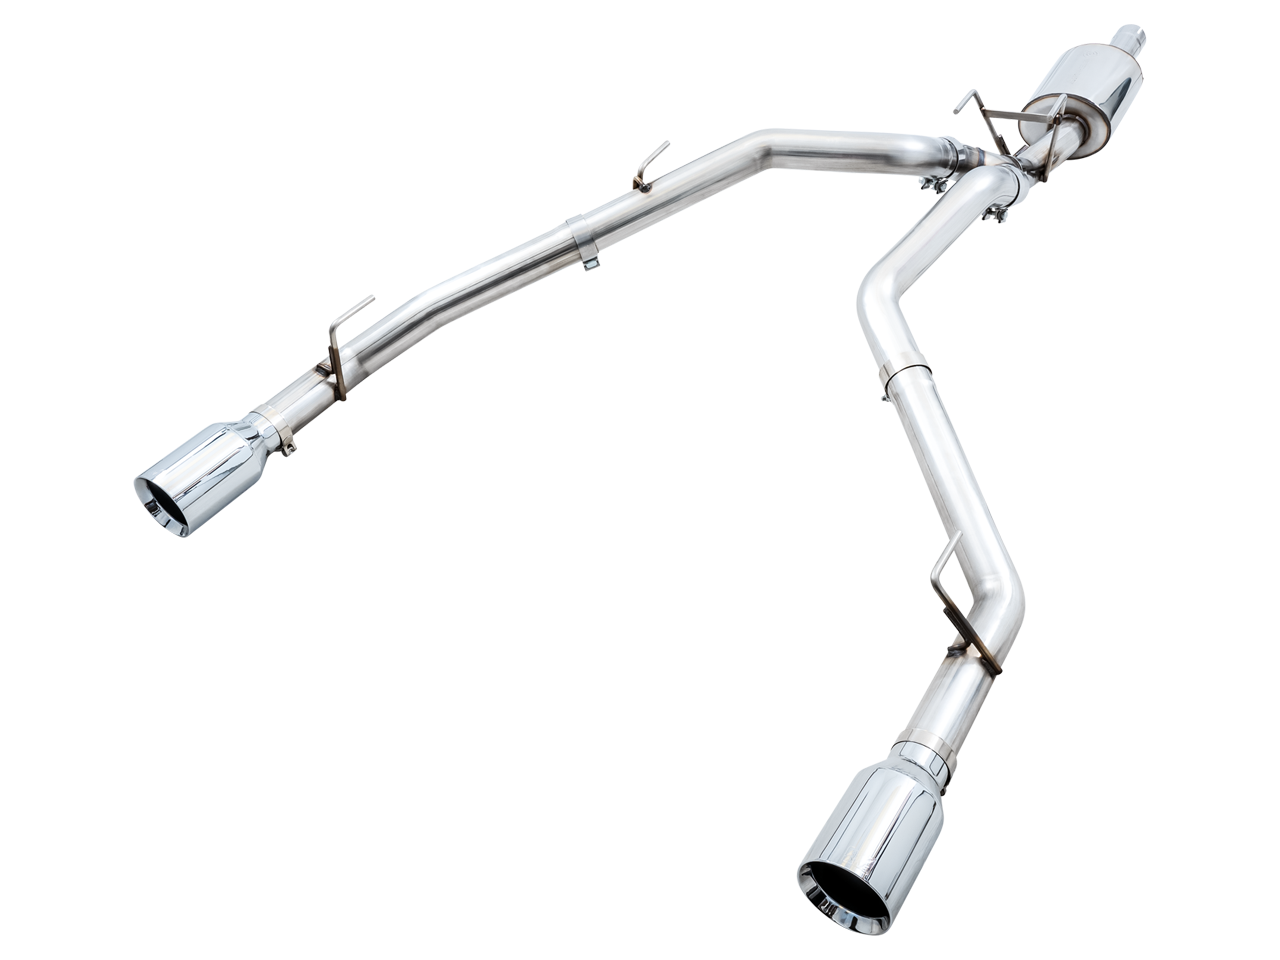 AWE 0FG Dual Rear Exit Catback Exhaust for 4th Gen RAM 1500 5.7L (Without Bumper Cutouts) - Chrome Silver Tips